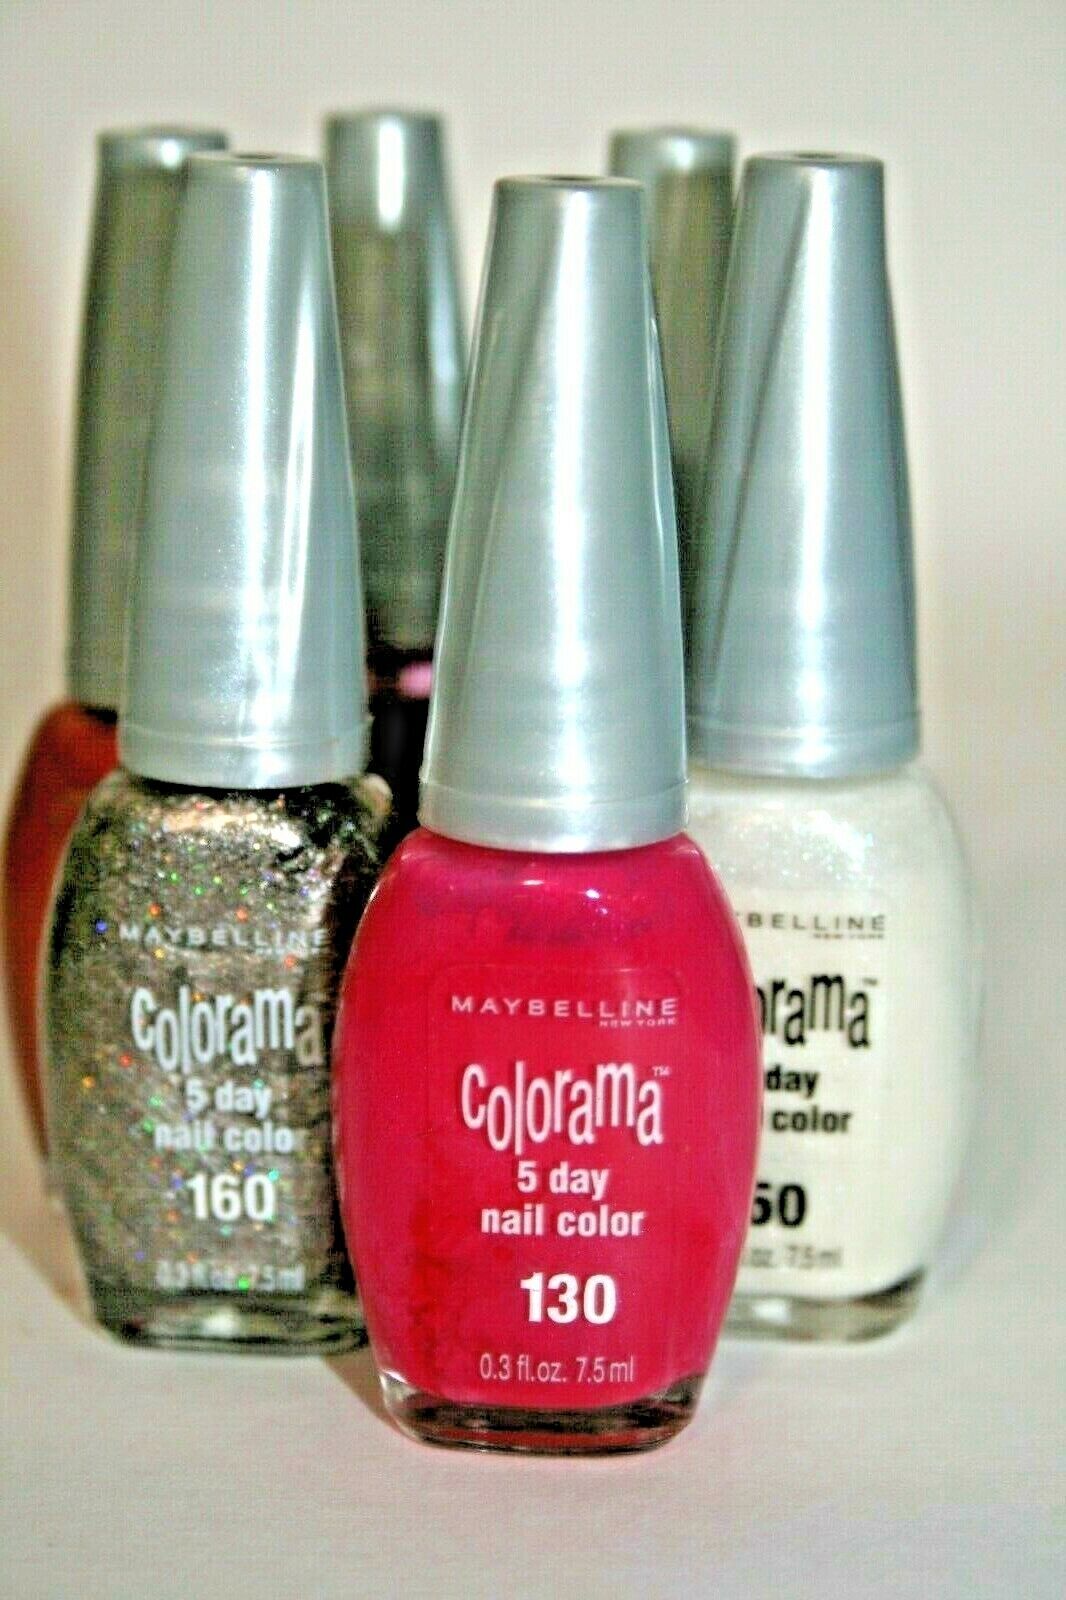 Maybelline Colorama nail polish in Absinto review and swatch  Indian  Fashion and Lifestyle Blogger  Moonshine and sunlight